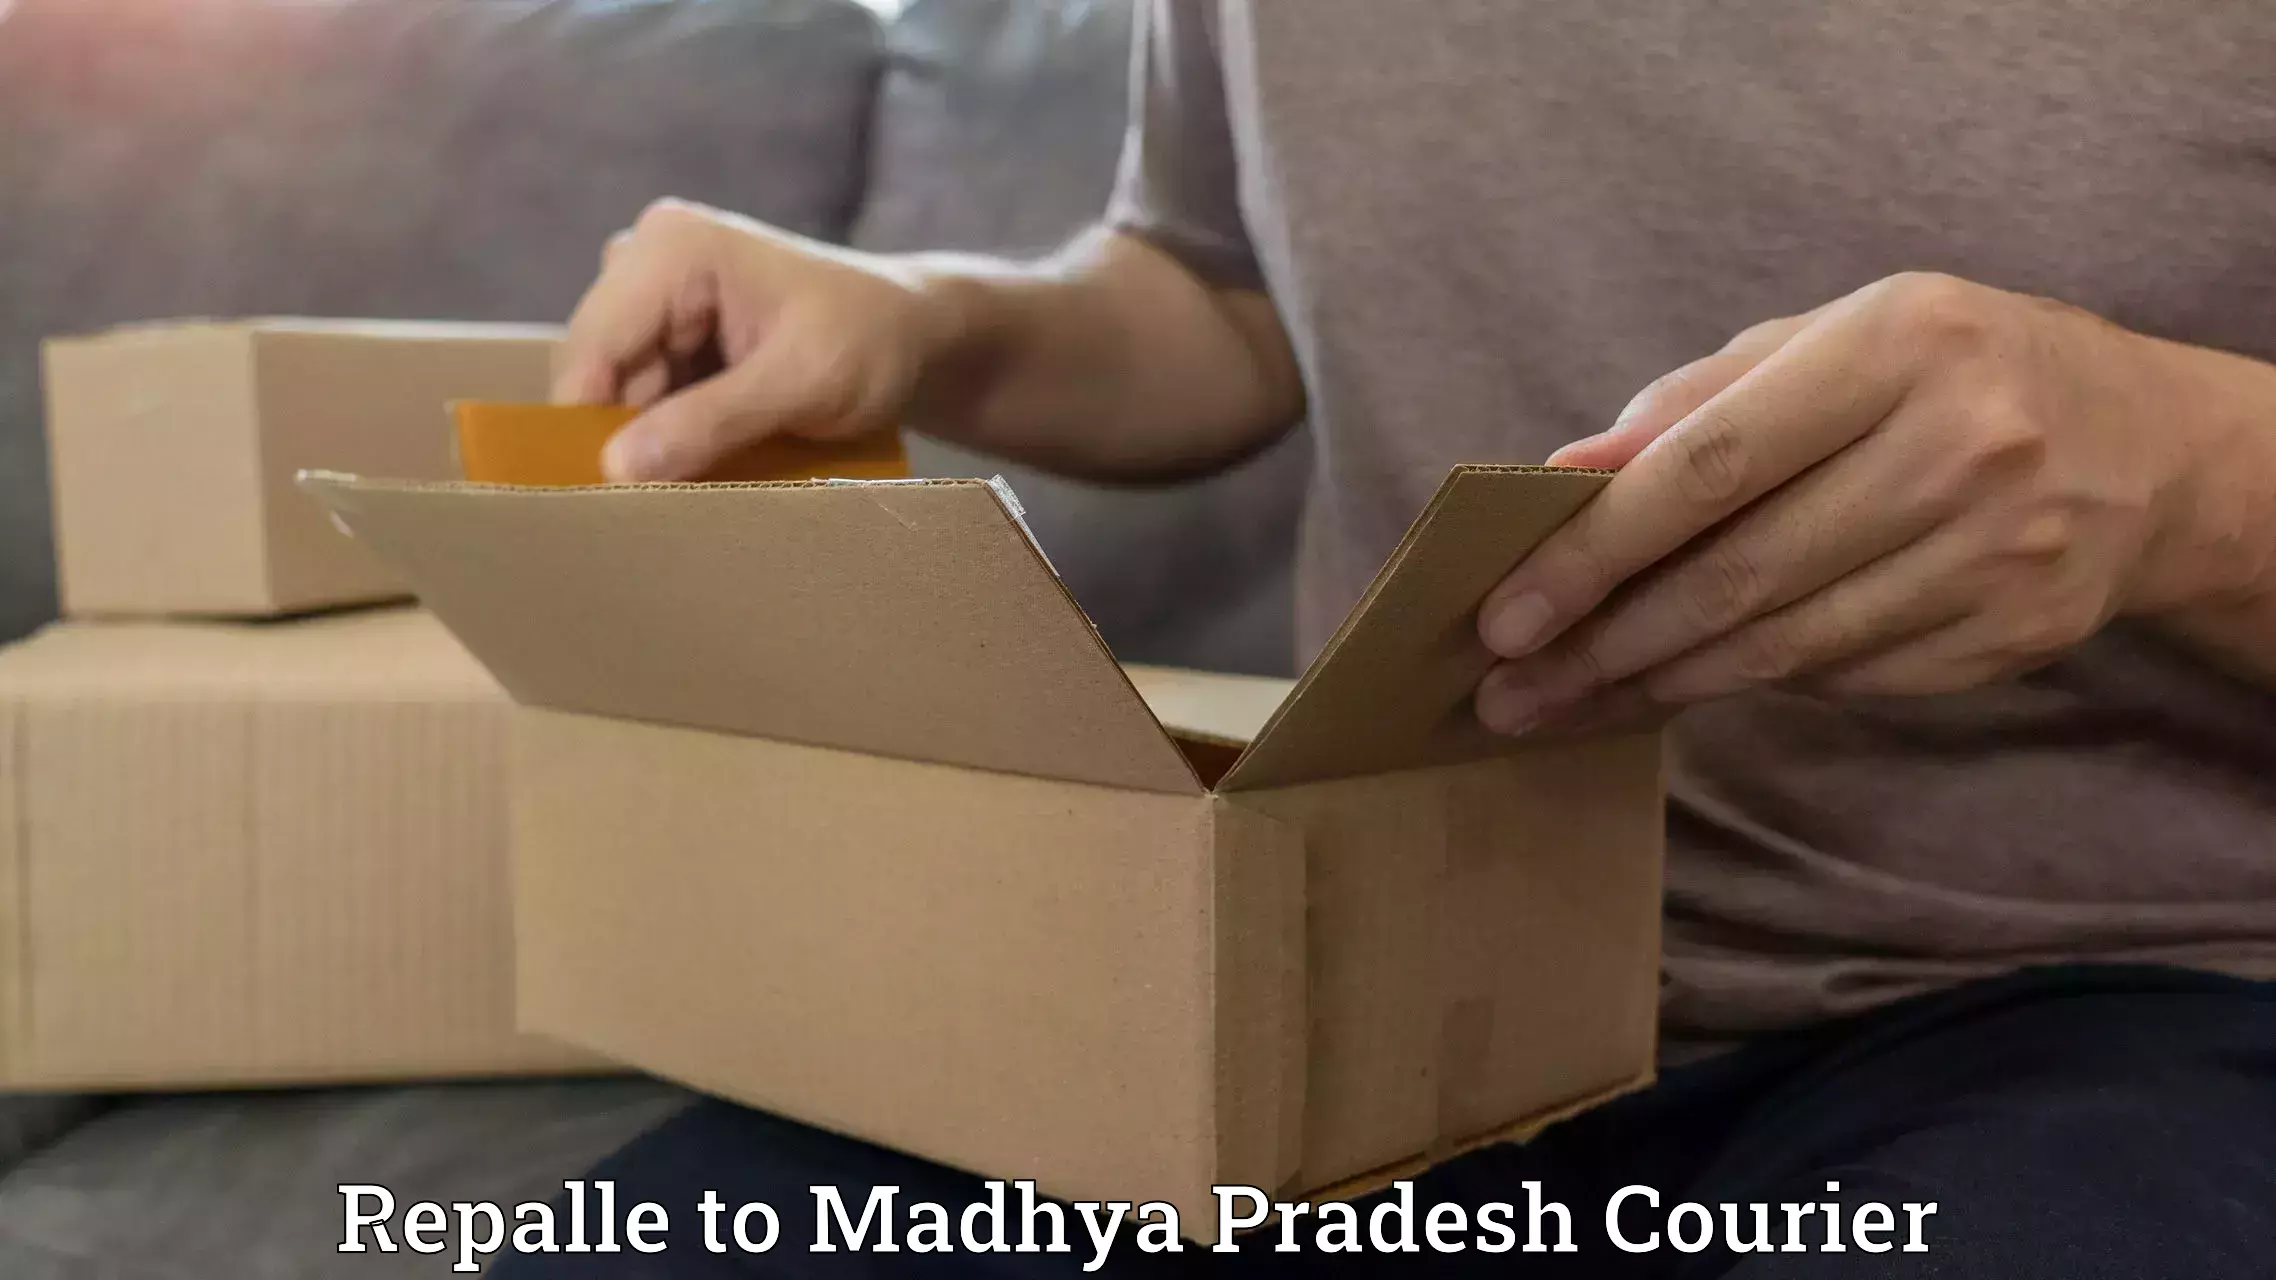 Ocean freight courier Repalle to Madhya Pradesh